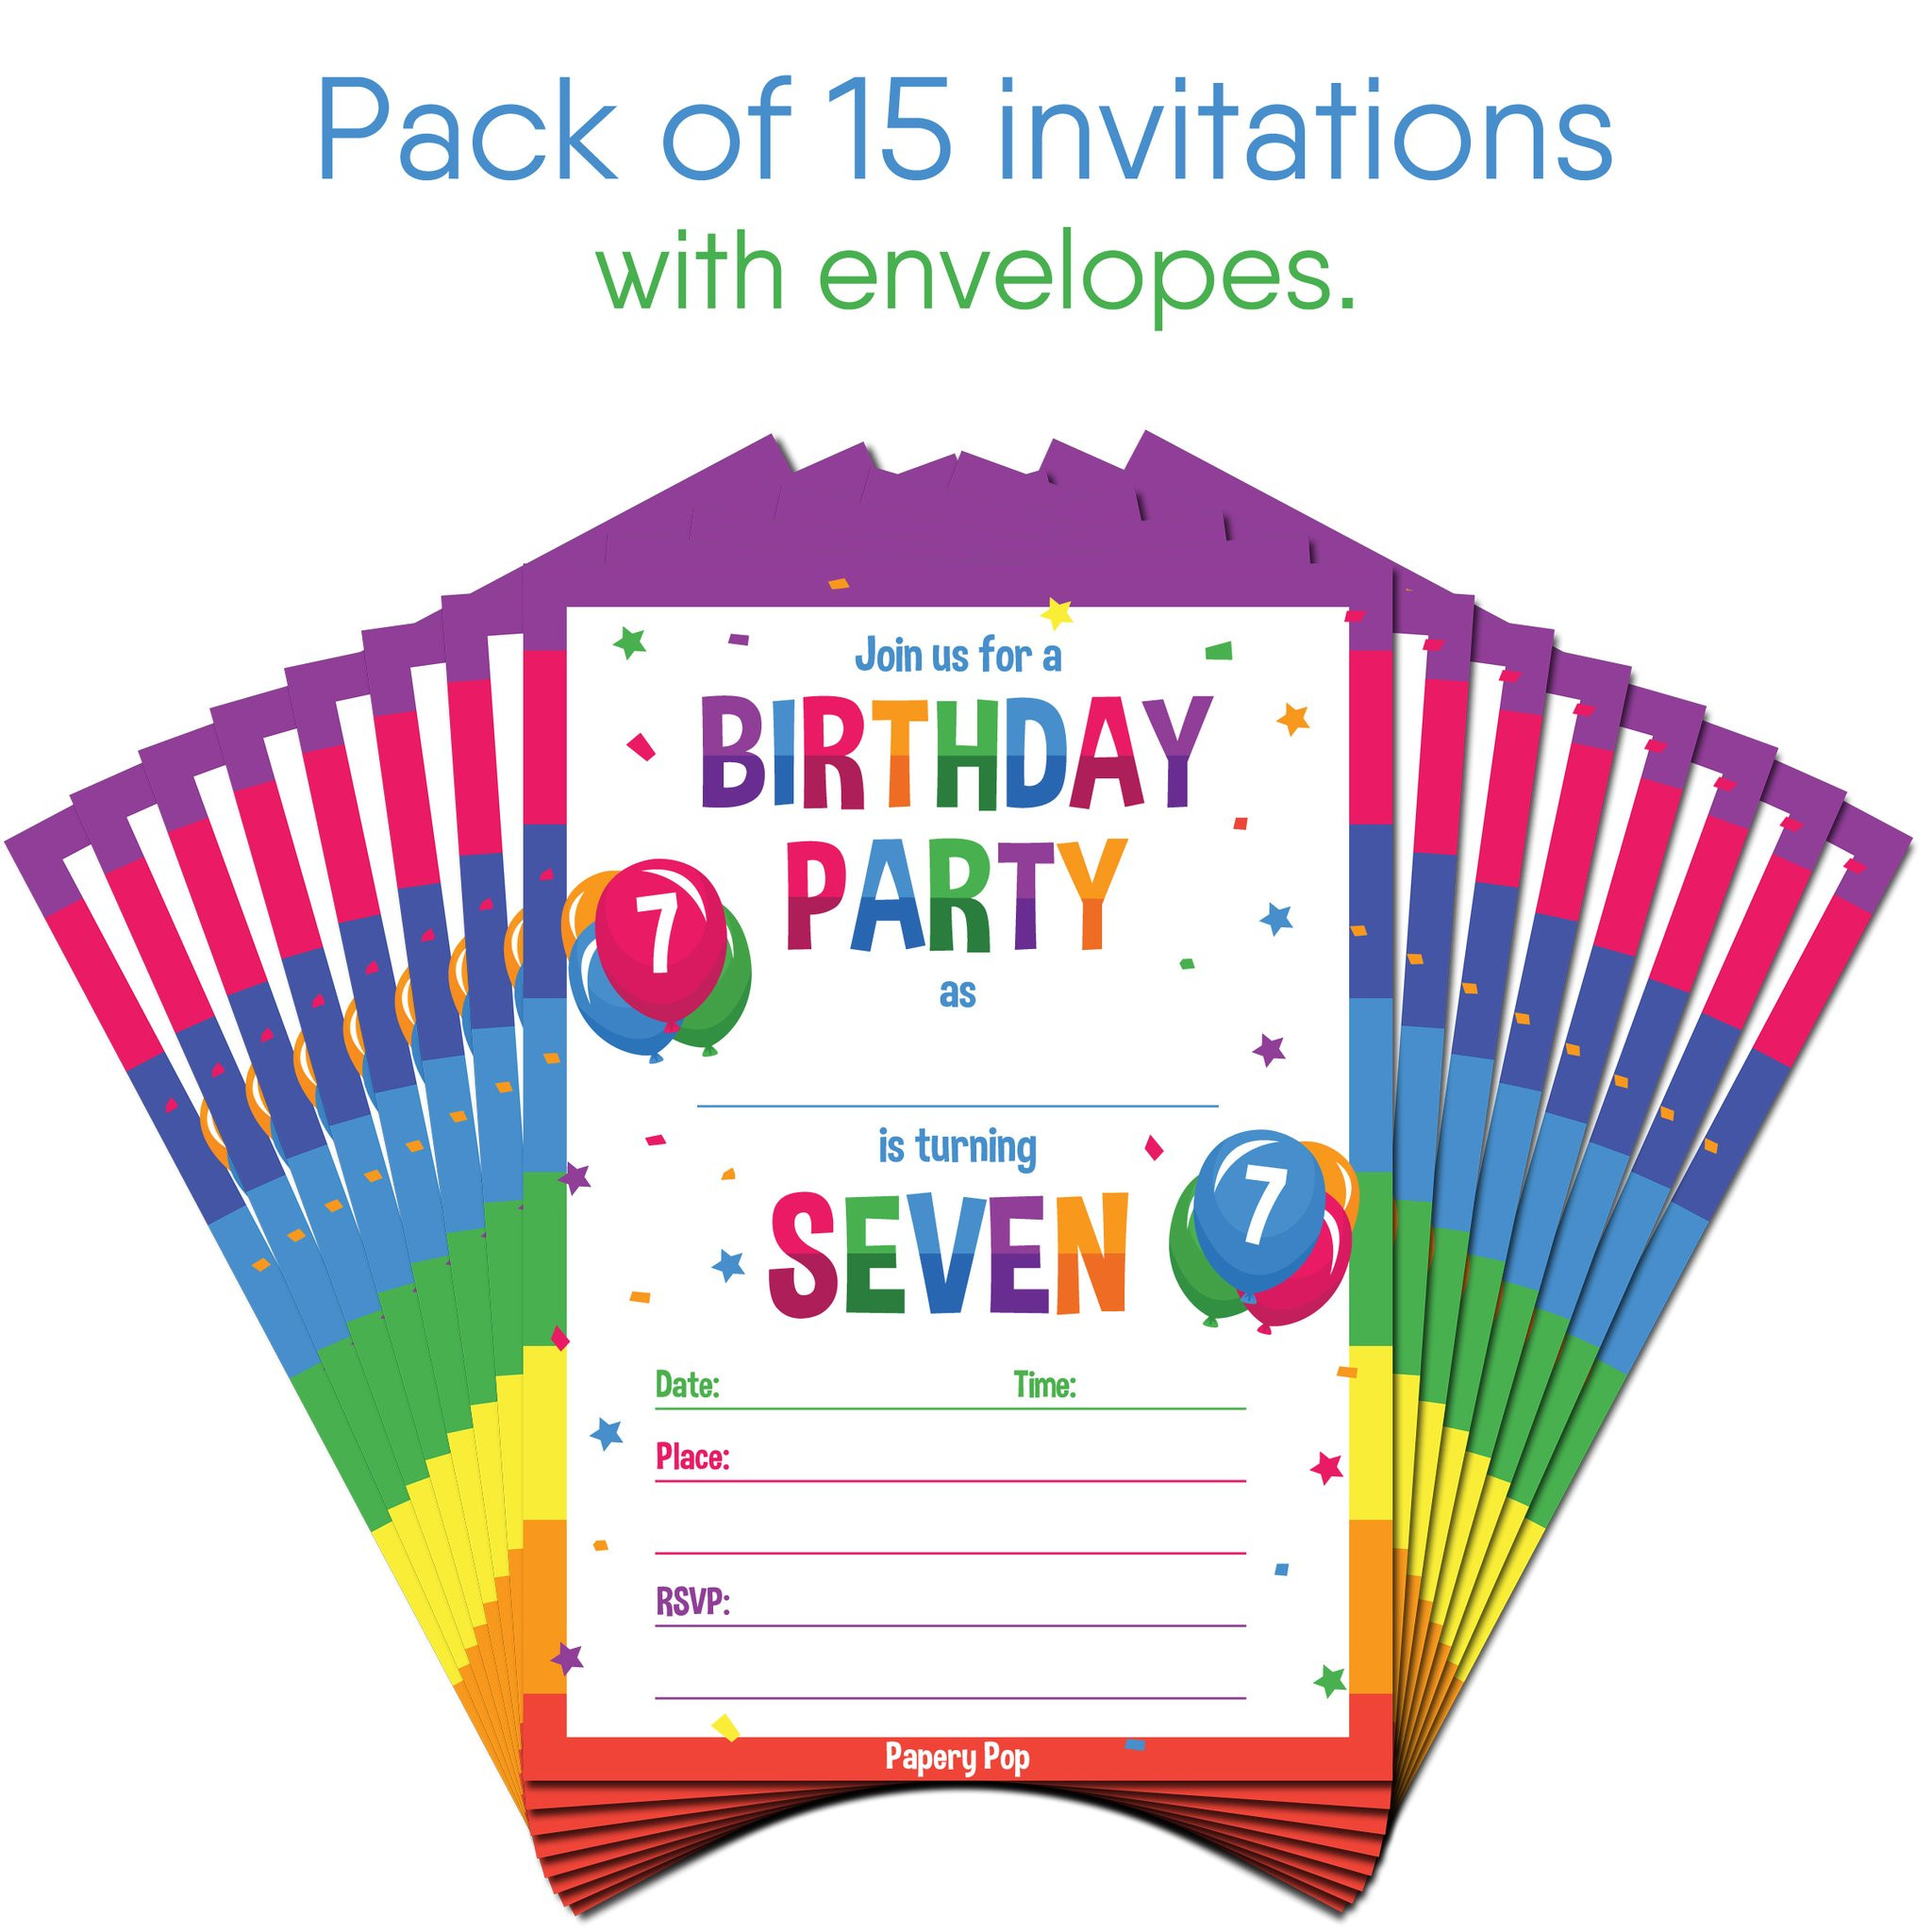 7 Year Old Birthday Party
 7 Year Old Birthday Party Invitations with Envelopes 15